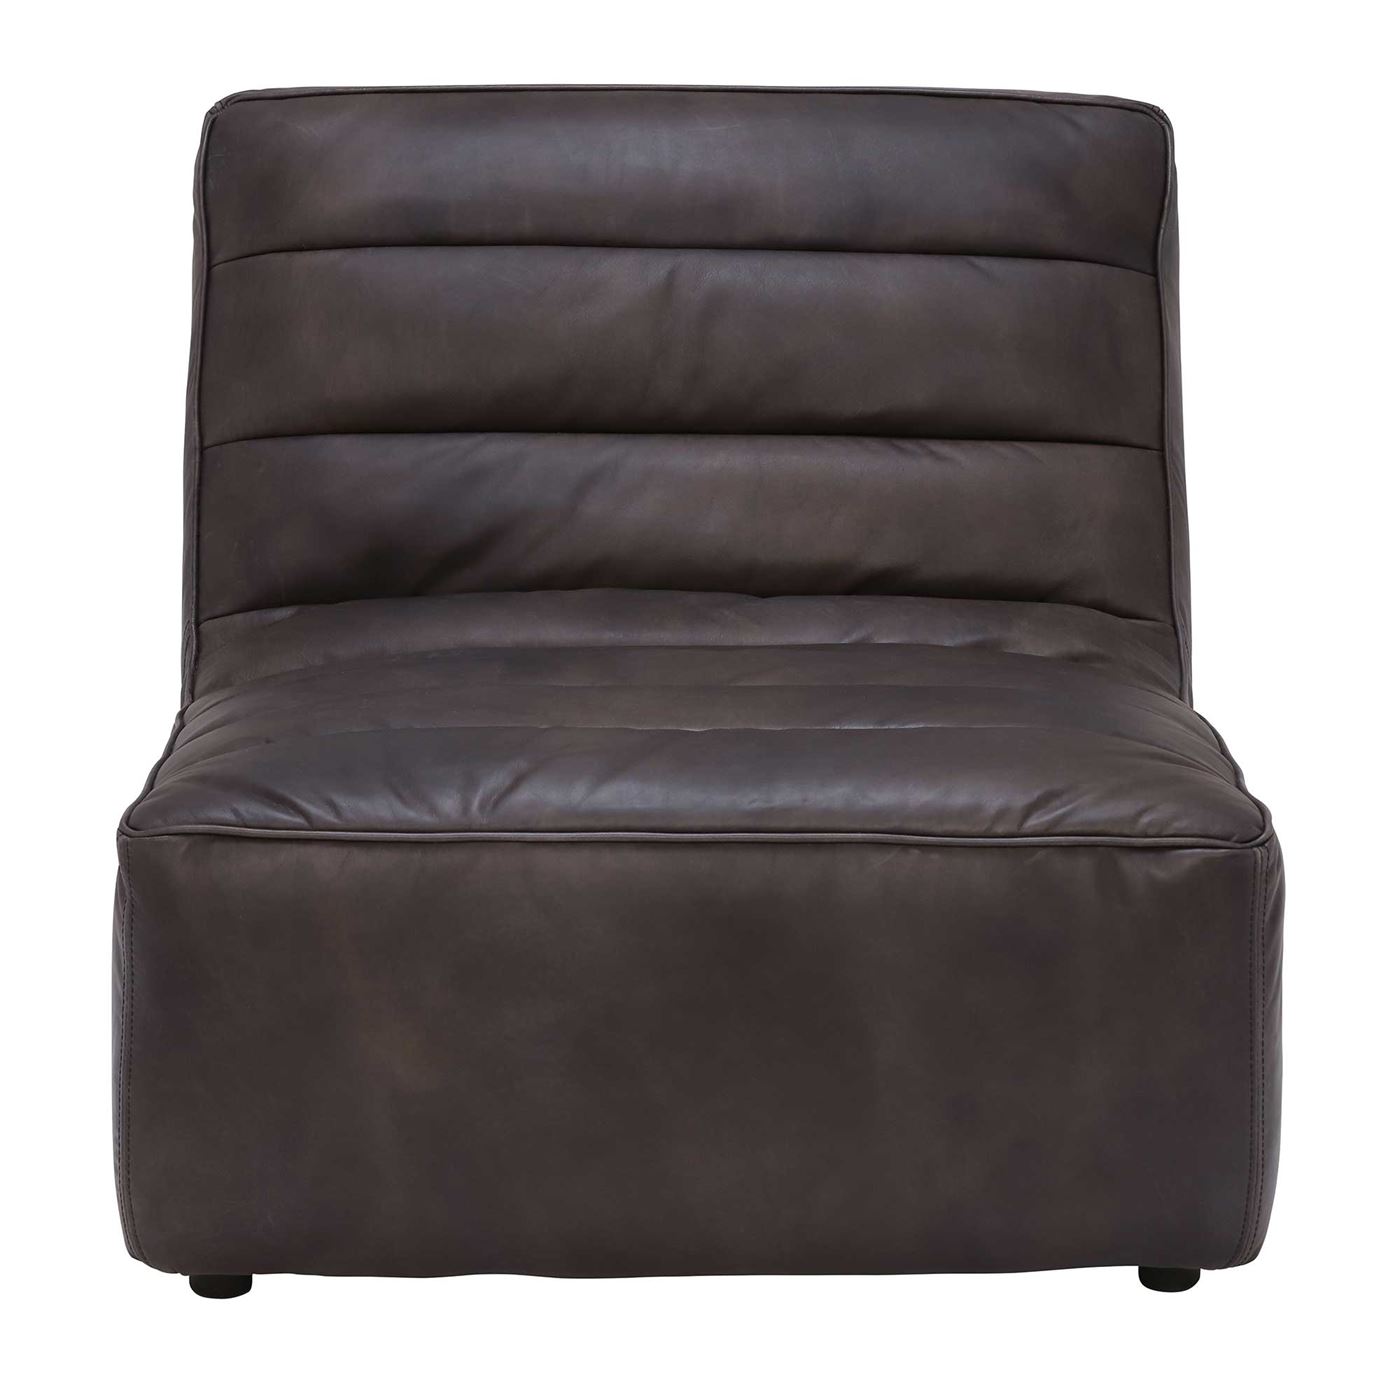 Timothy Oulton Shabby Sectional Chaise Sofa, Black Leather | Barker & Stonehouse